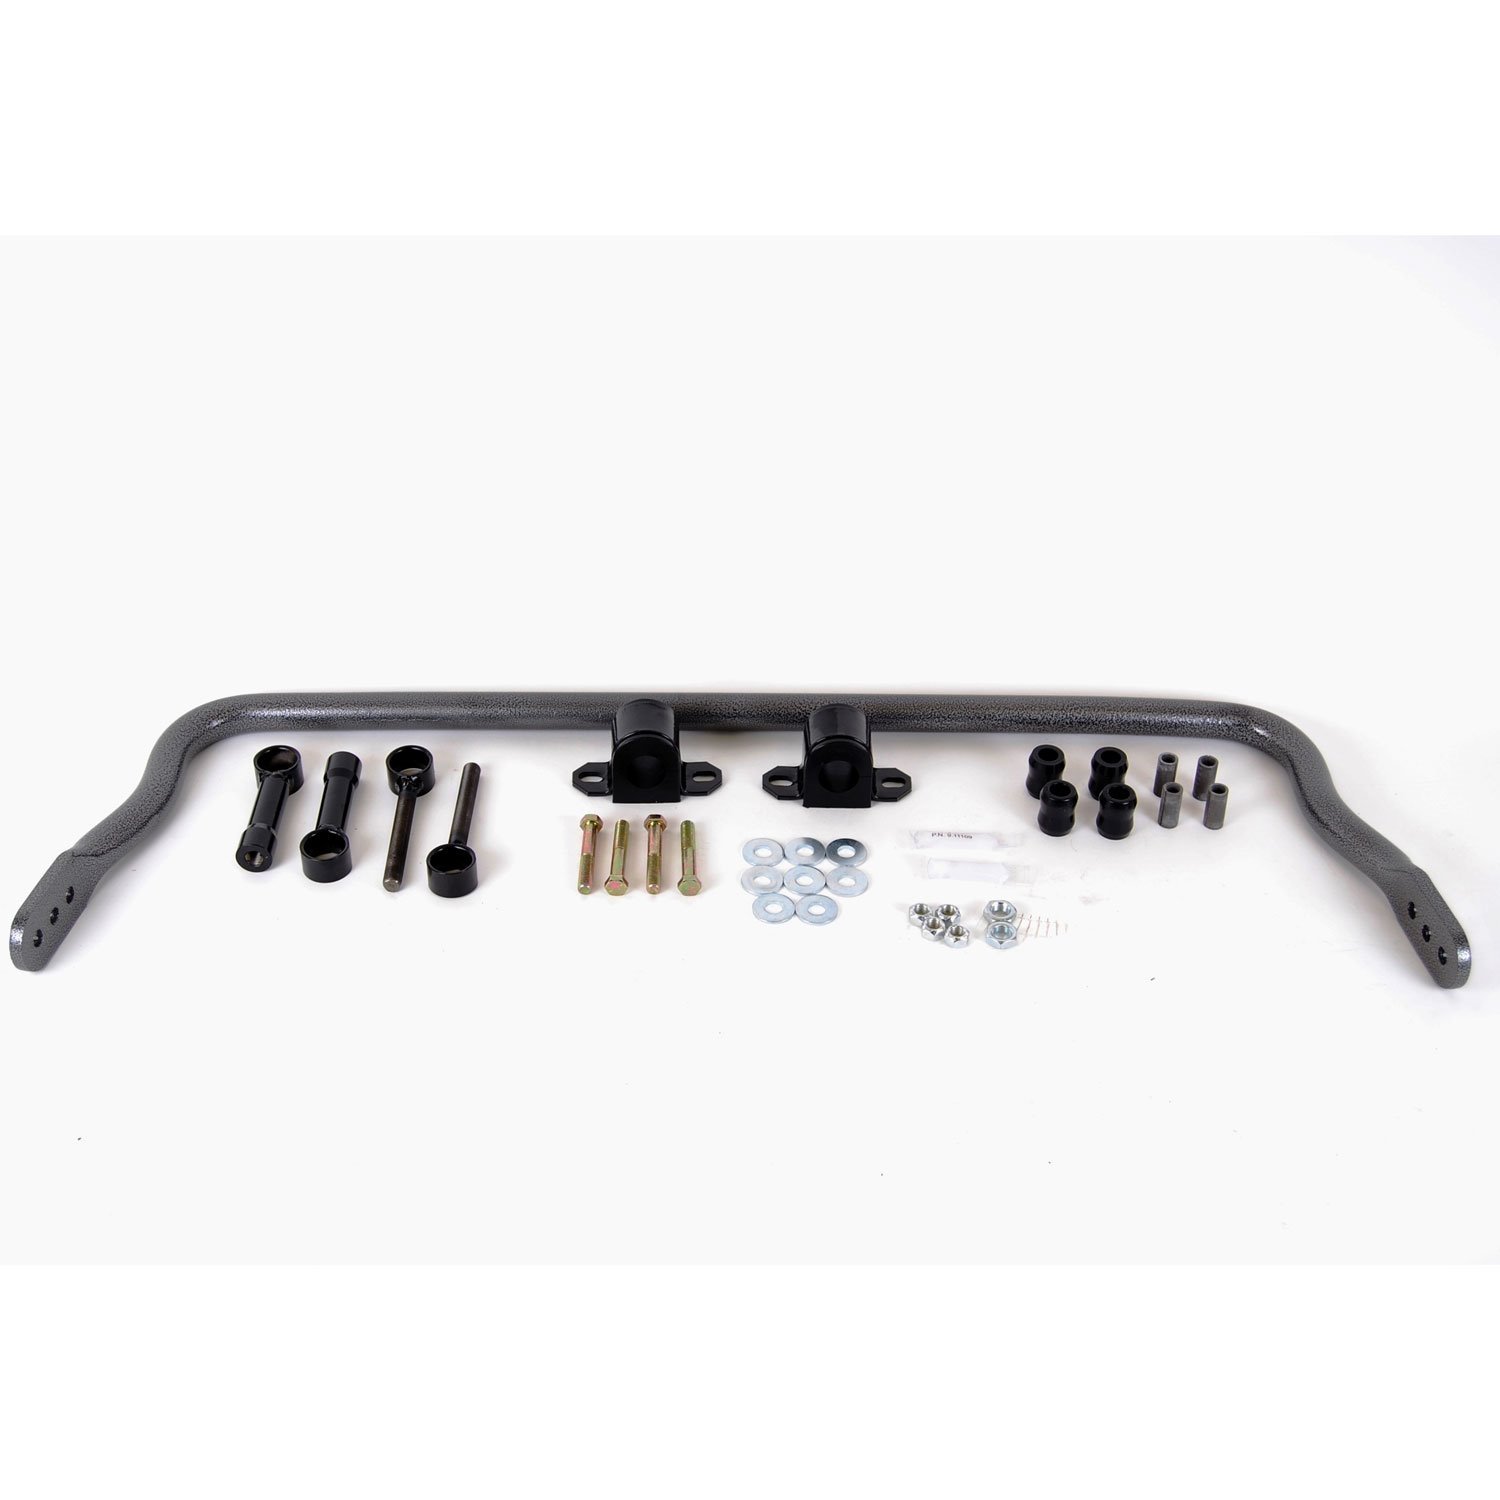 Front Sway Bar for 2007-2016 Jeep Wrangler JK 4WD